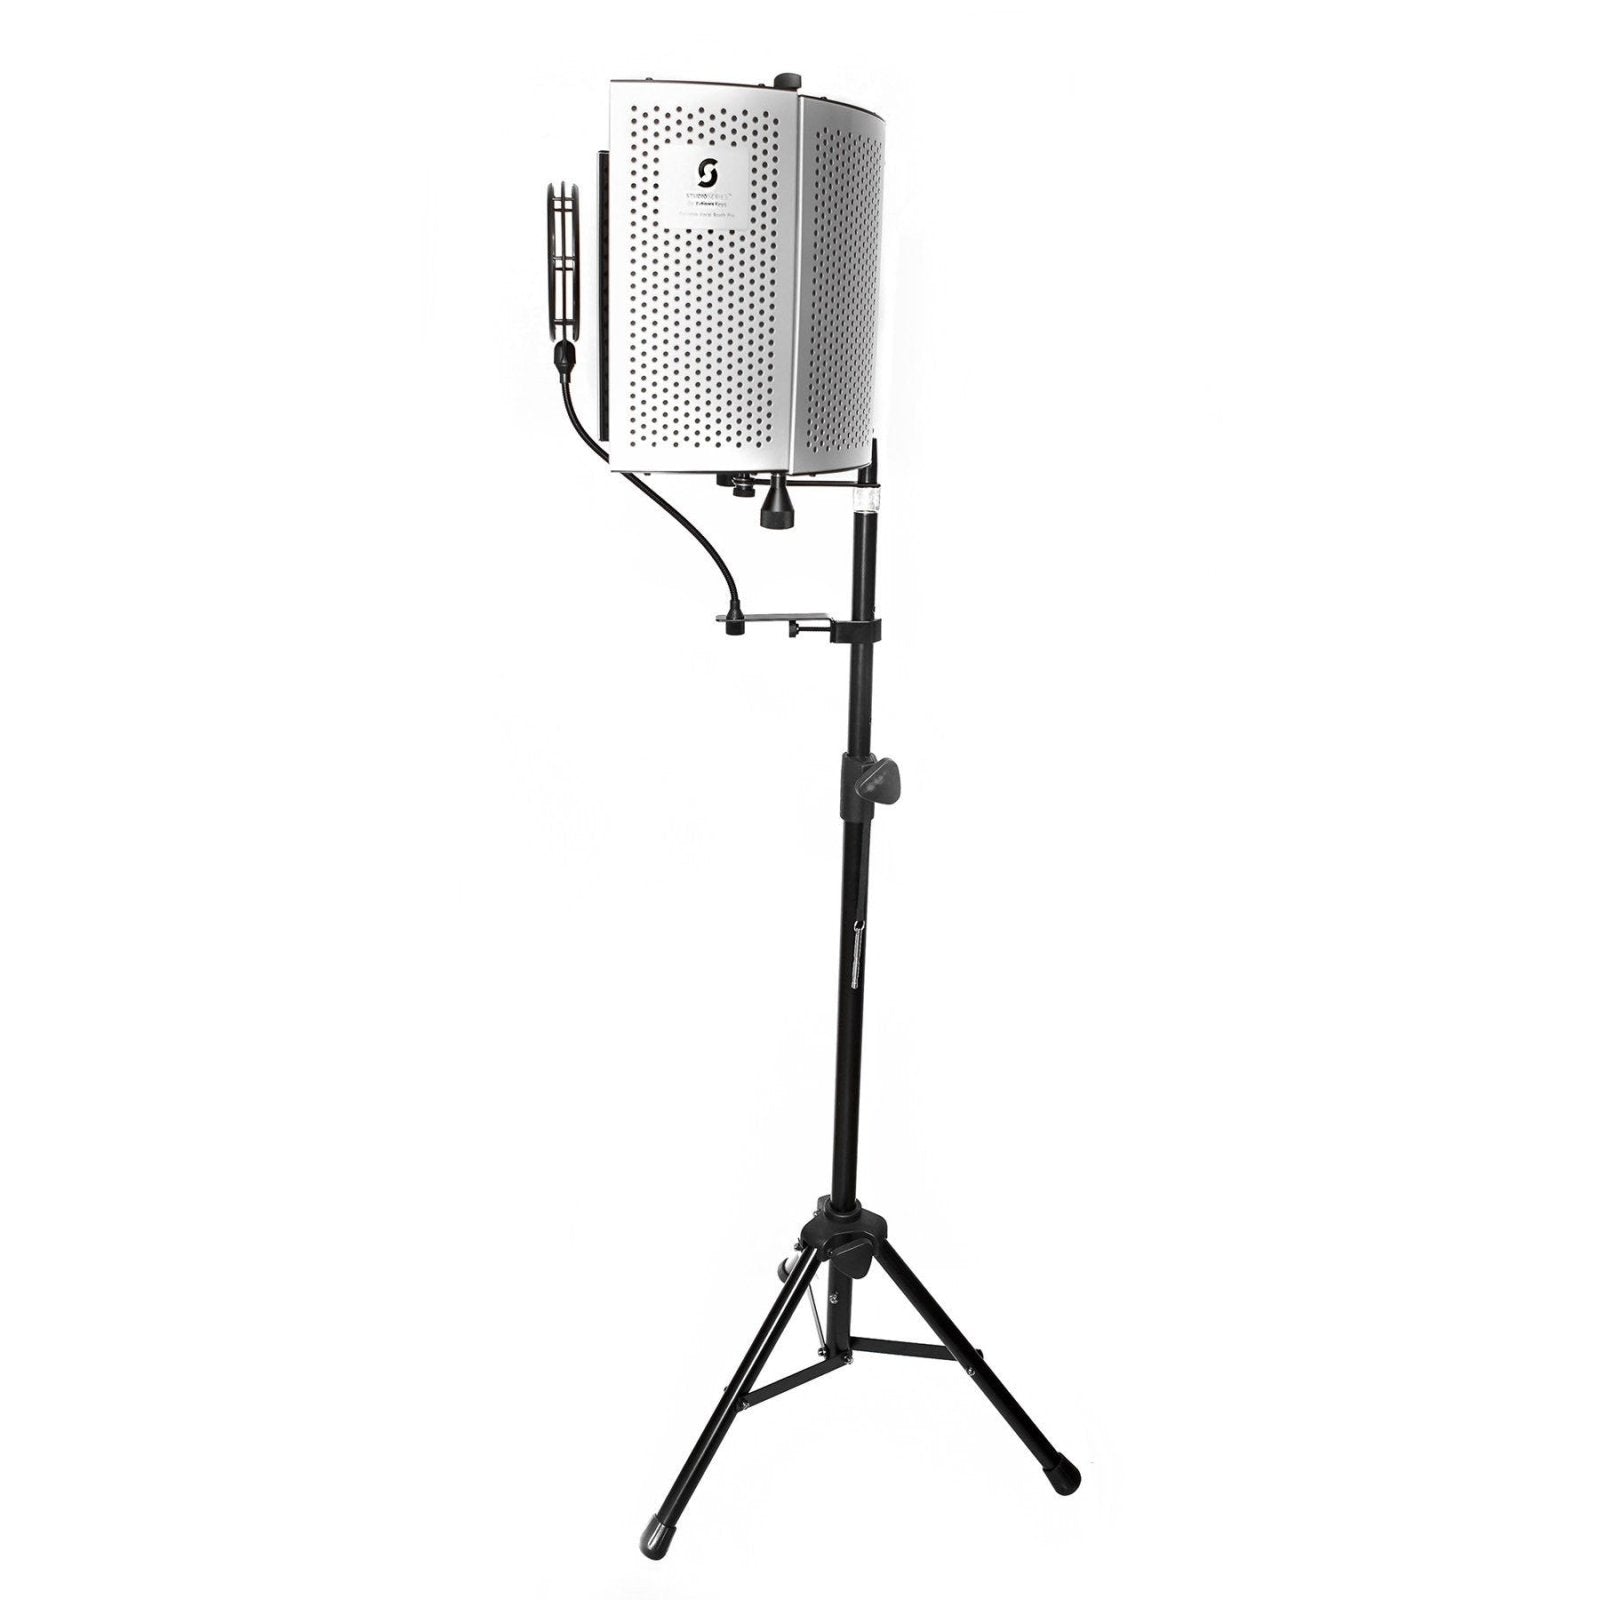 Portable Vocal Booth Pro with Floor & Desk Stands - Editors Keys